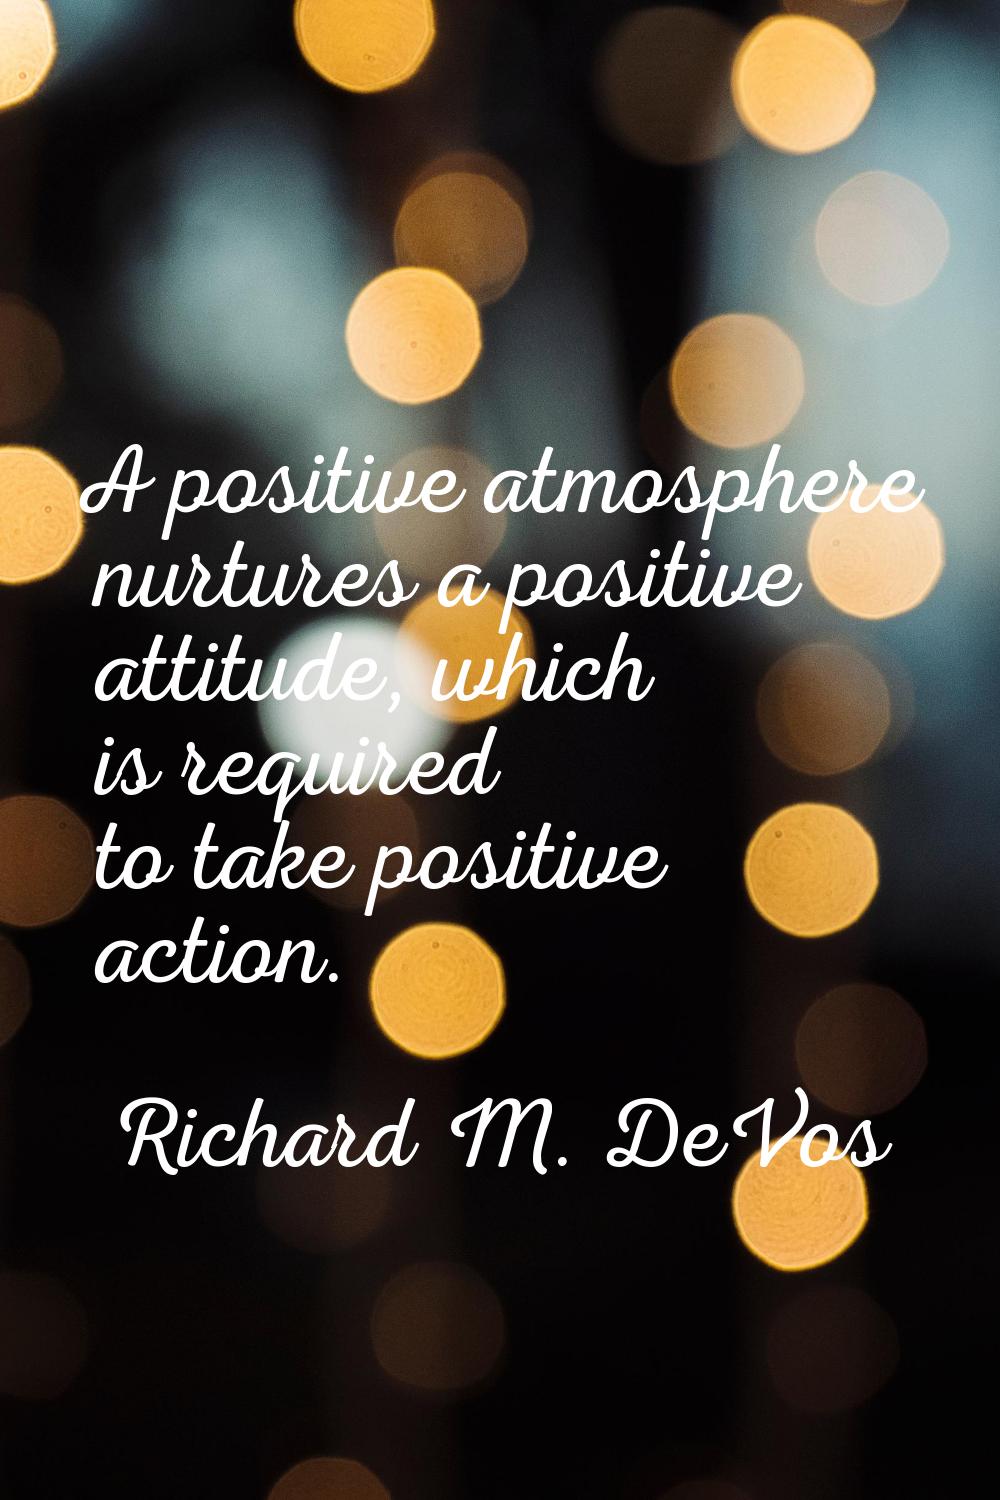 A positive atmosphere nurtures a positive attitude, which is required to take positive action.